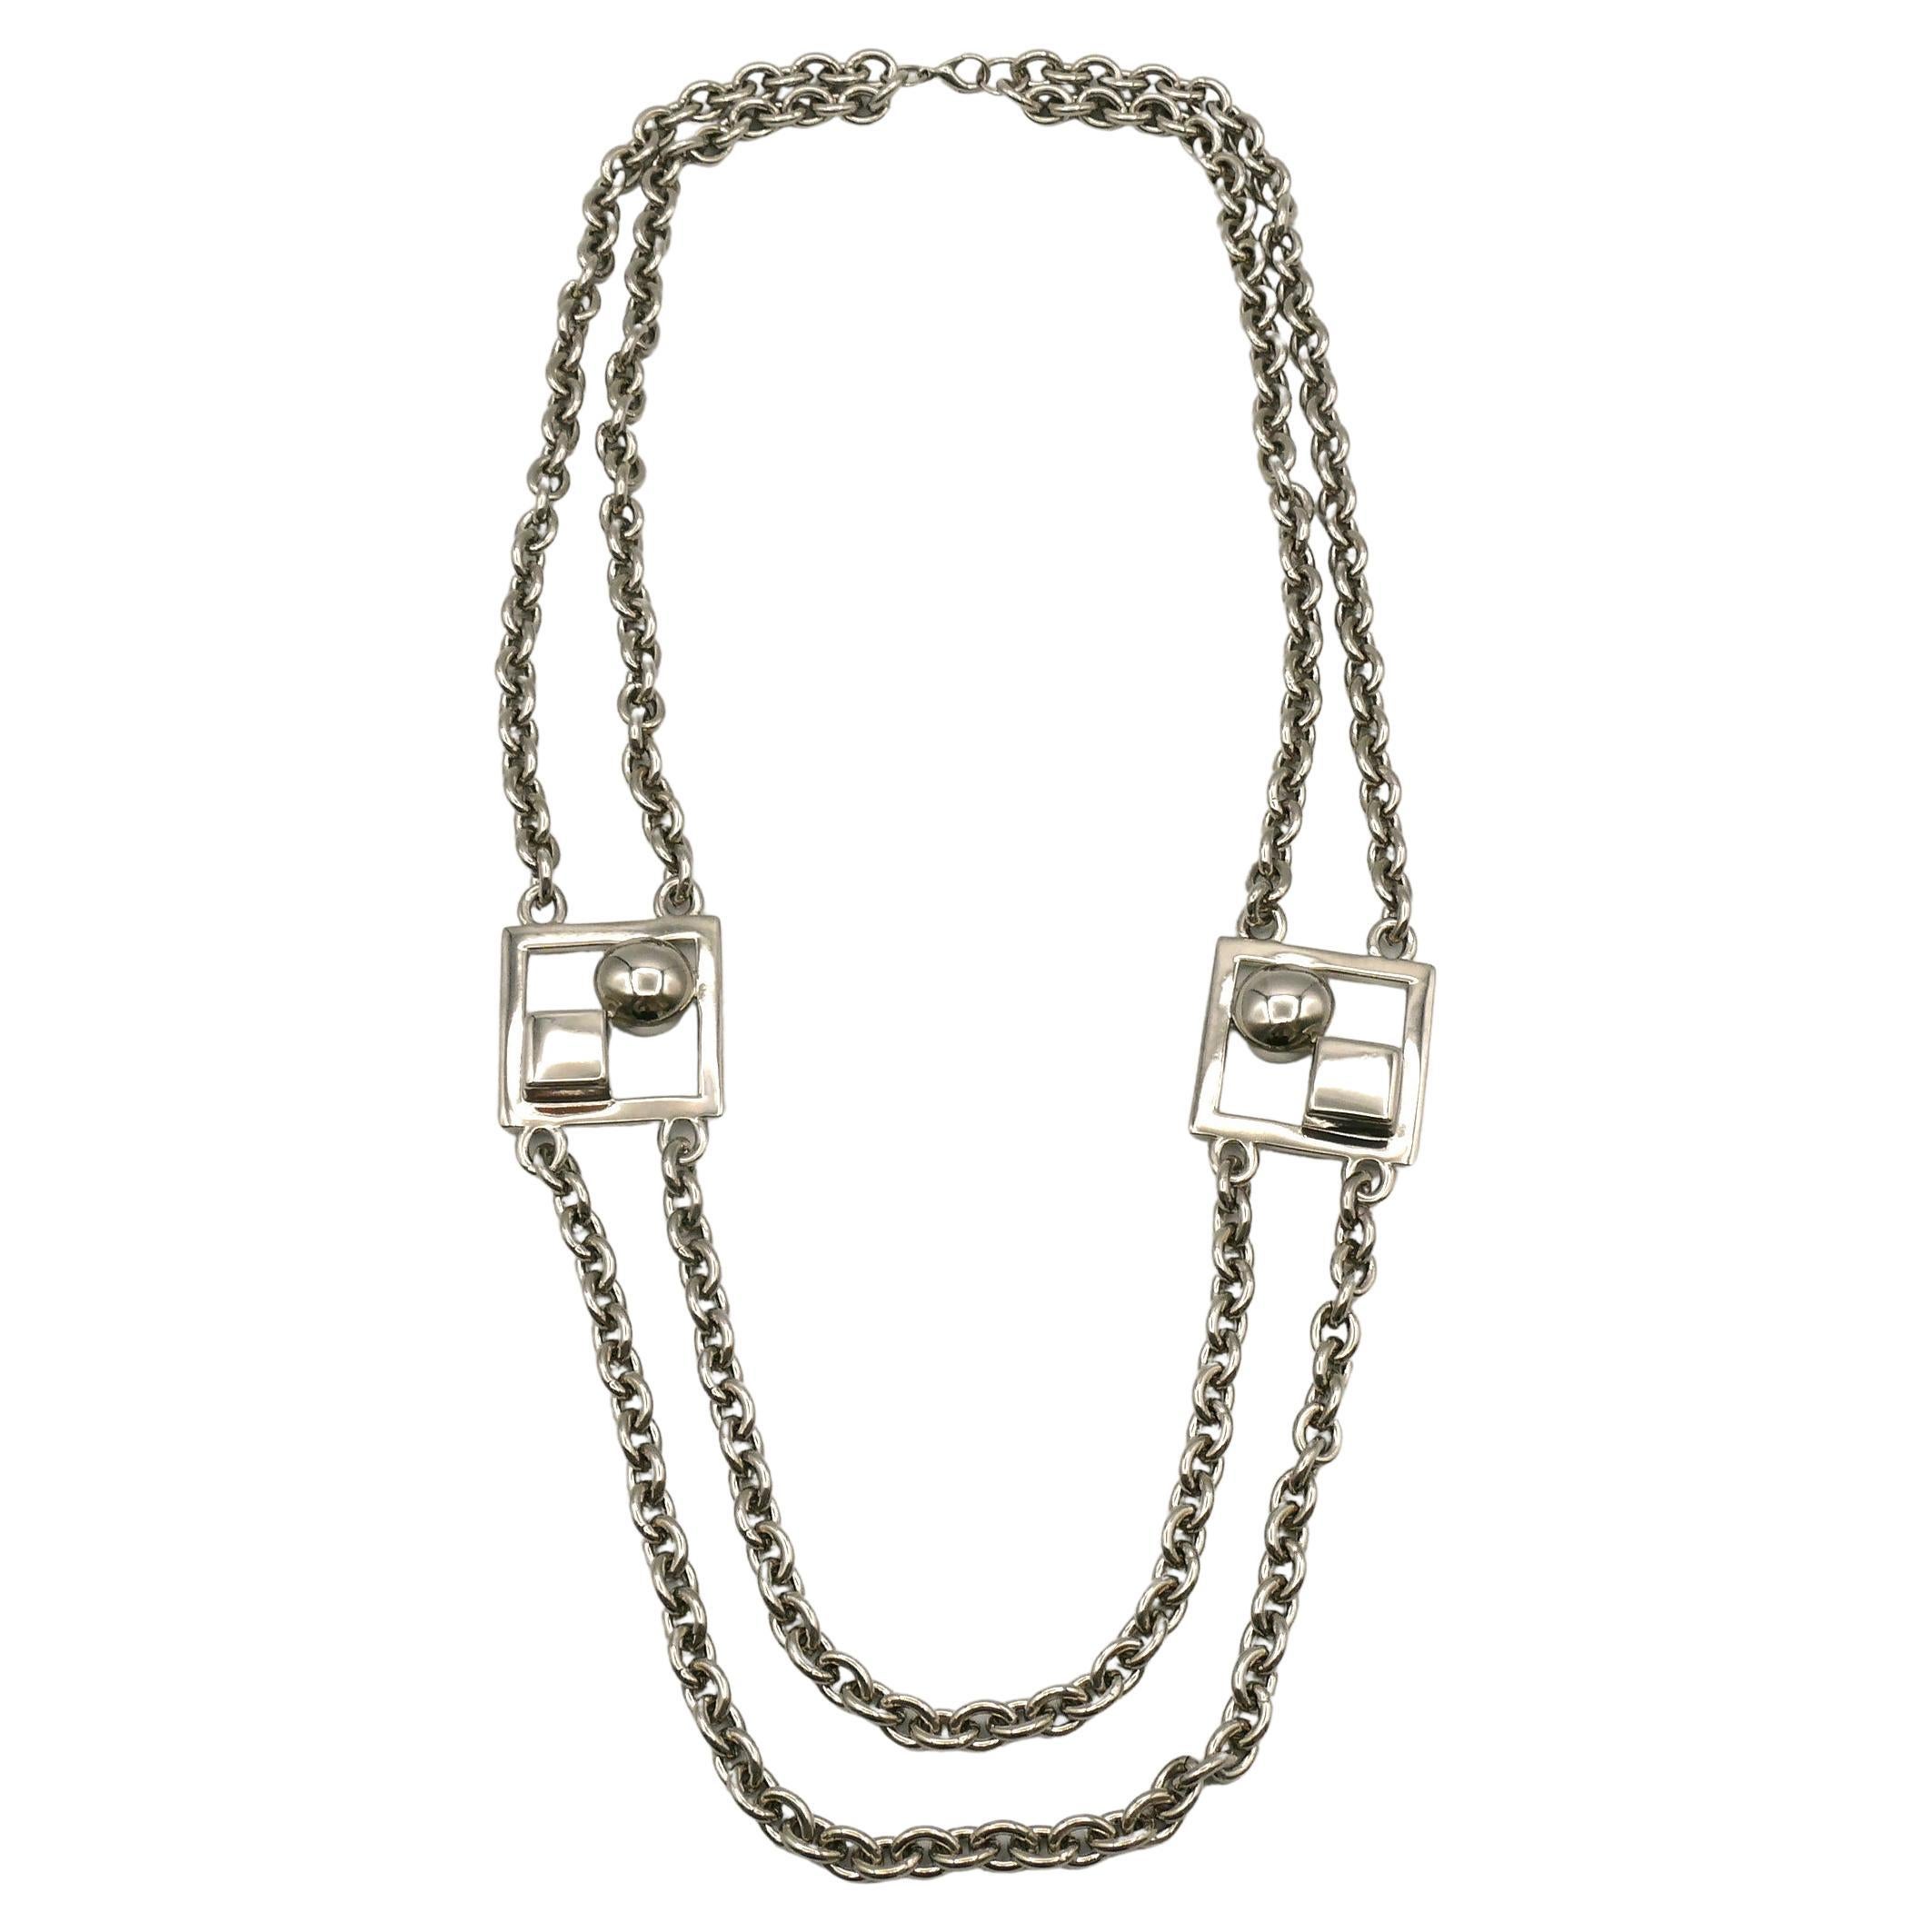 PACO RABANNE Vintage Silver Tone Modernist Chain Necklace For Sale